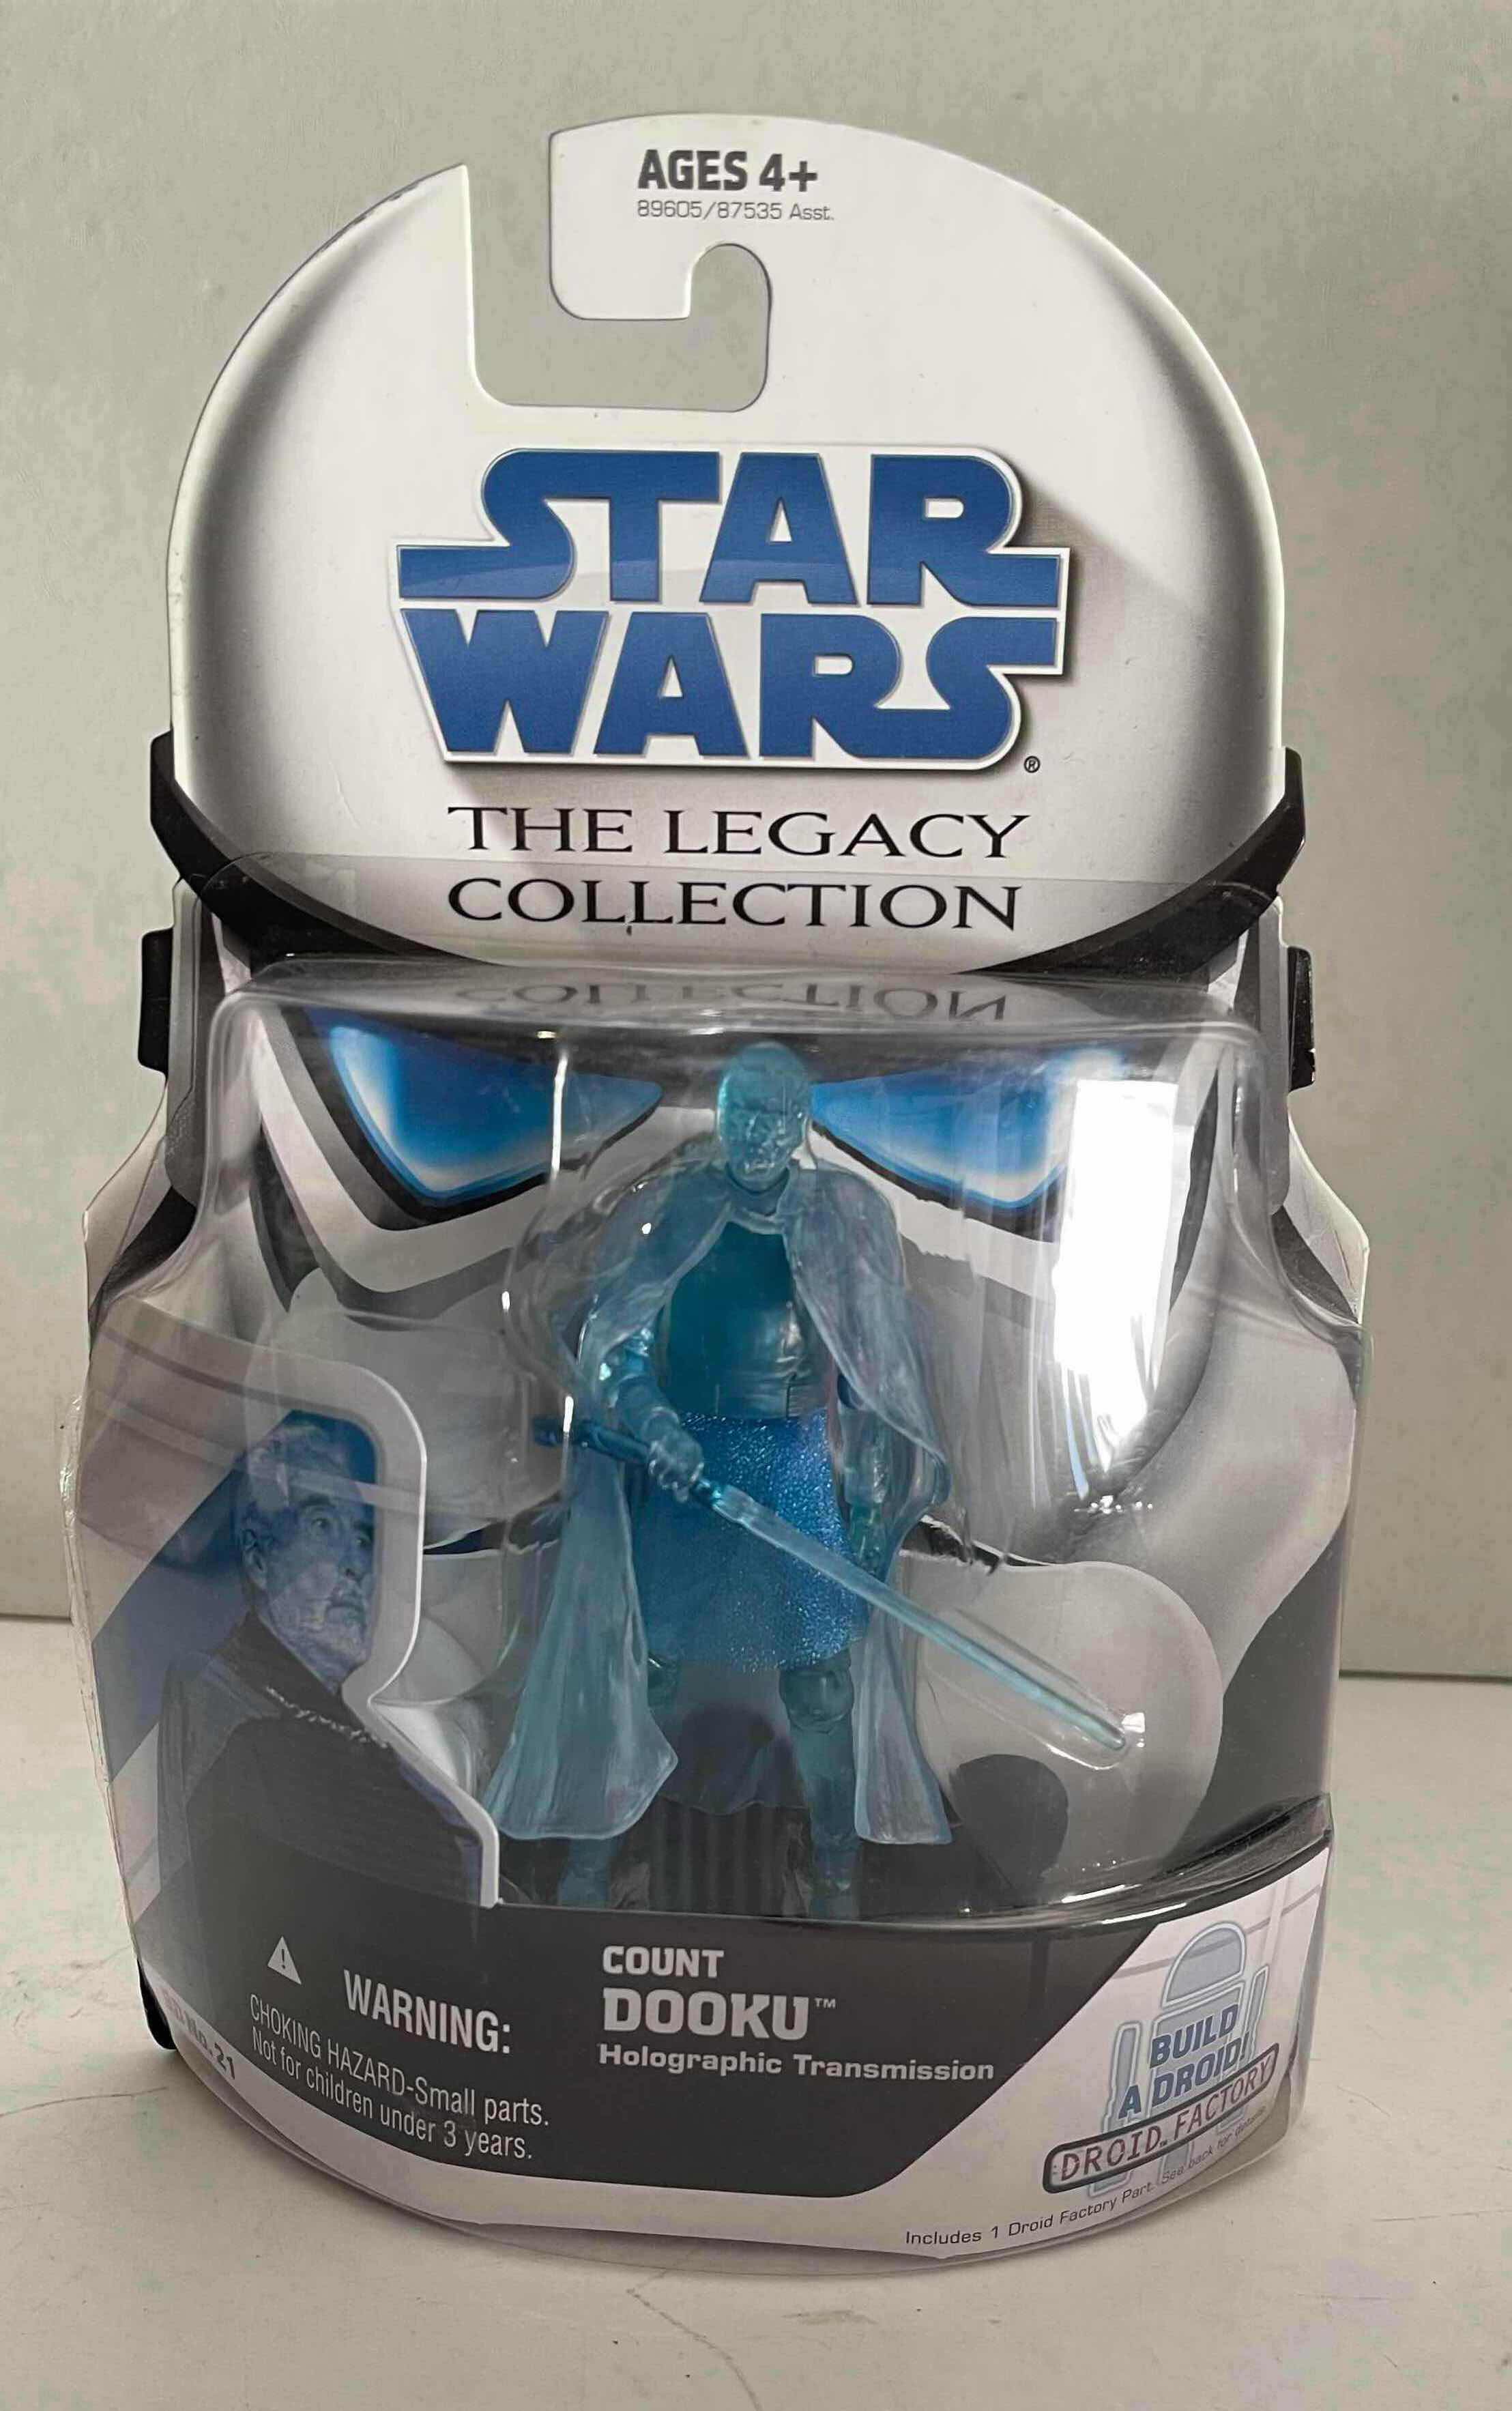 Photo 1 of NIB STAR WARS THE LEGACY COLLECTION: COUNT DOOKU HOLOGRAPHIC TRANSMISSION FIGURE #21- RETAIL PRICE $15.00